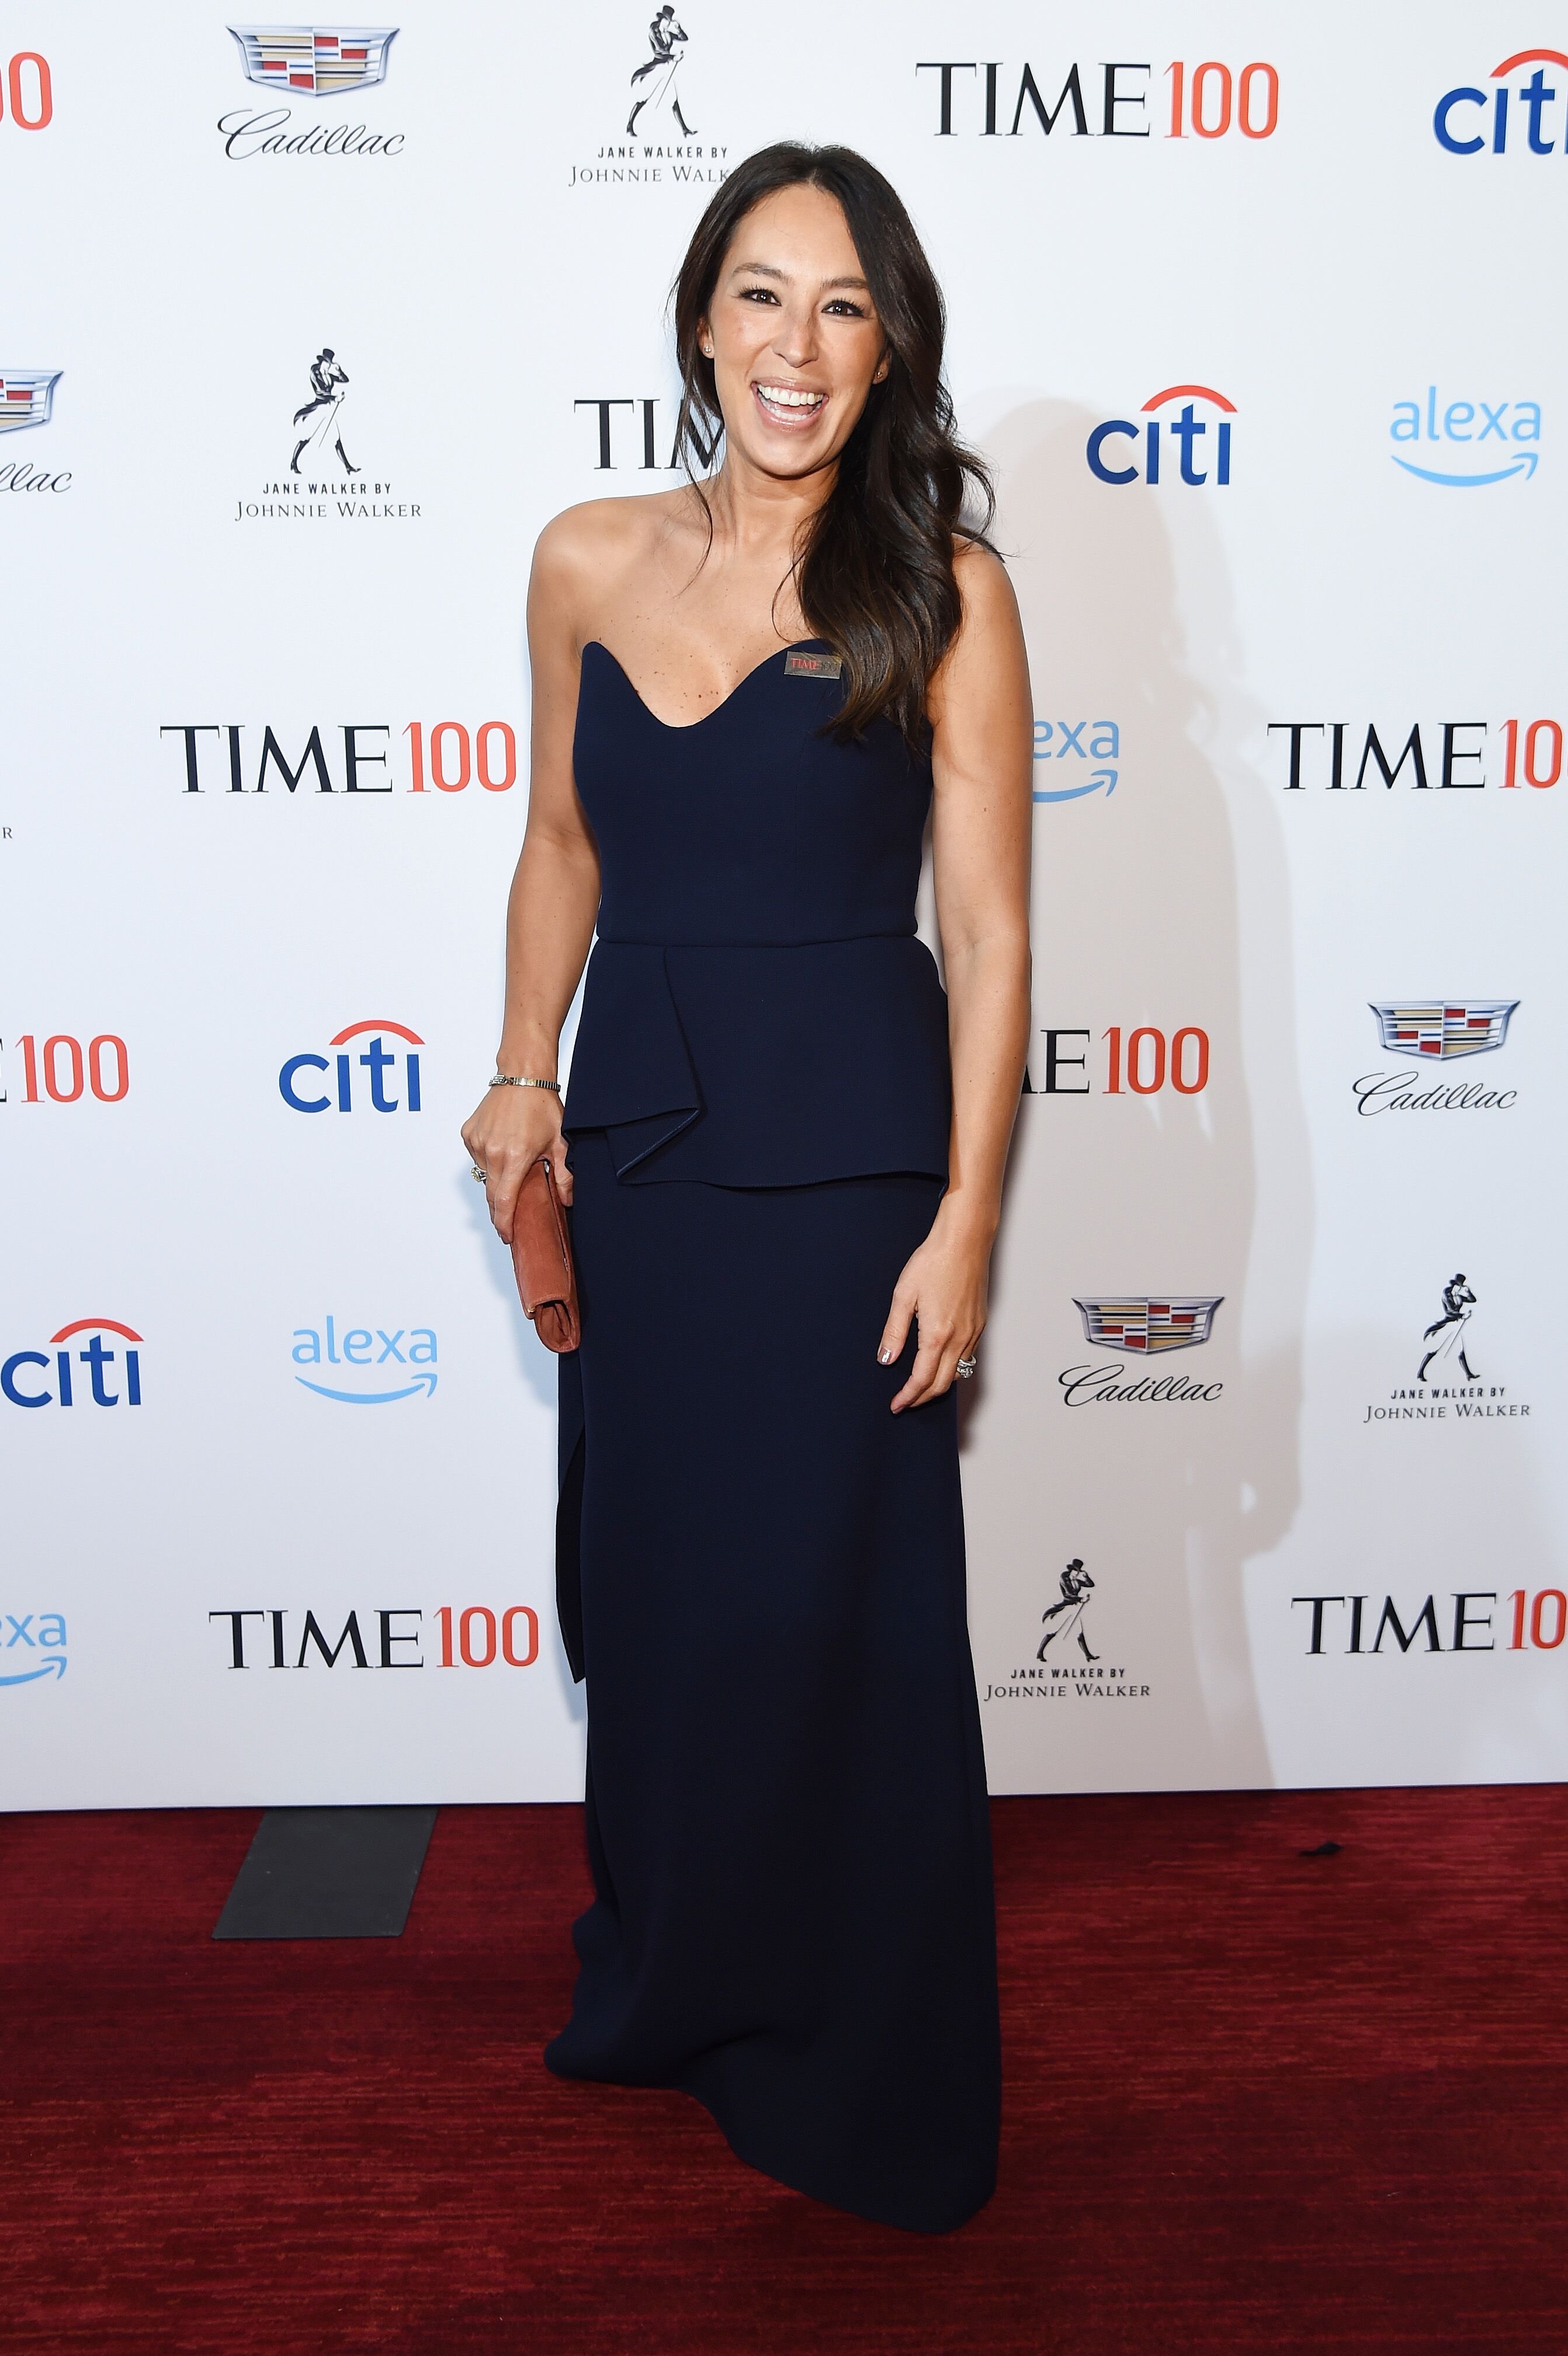 Joanna Gaines at the TIME 100 Gala Cocktails on April 23, 2019, in New York City | Photo: Larry Busacca/Getty Images